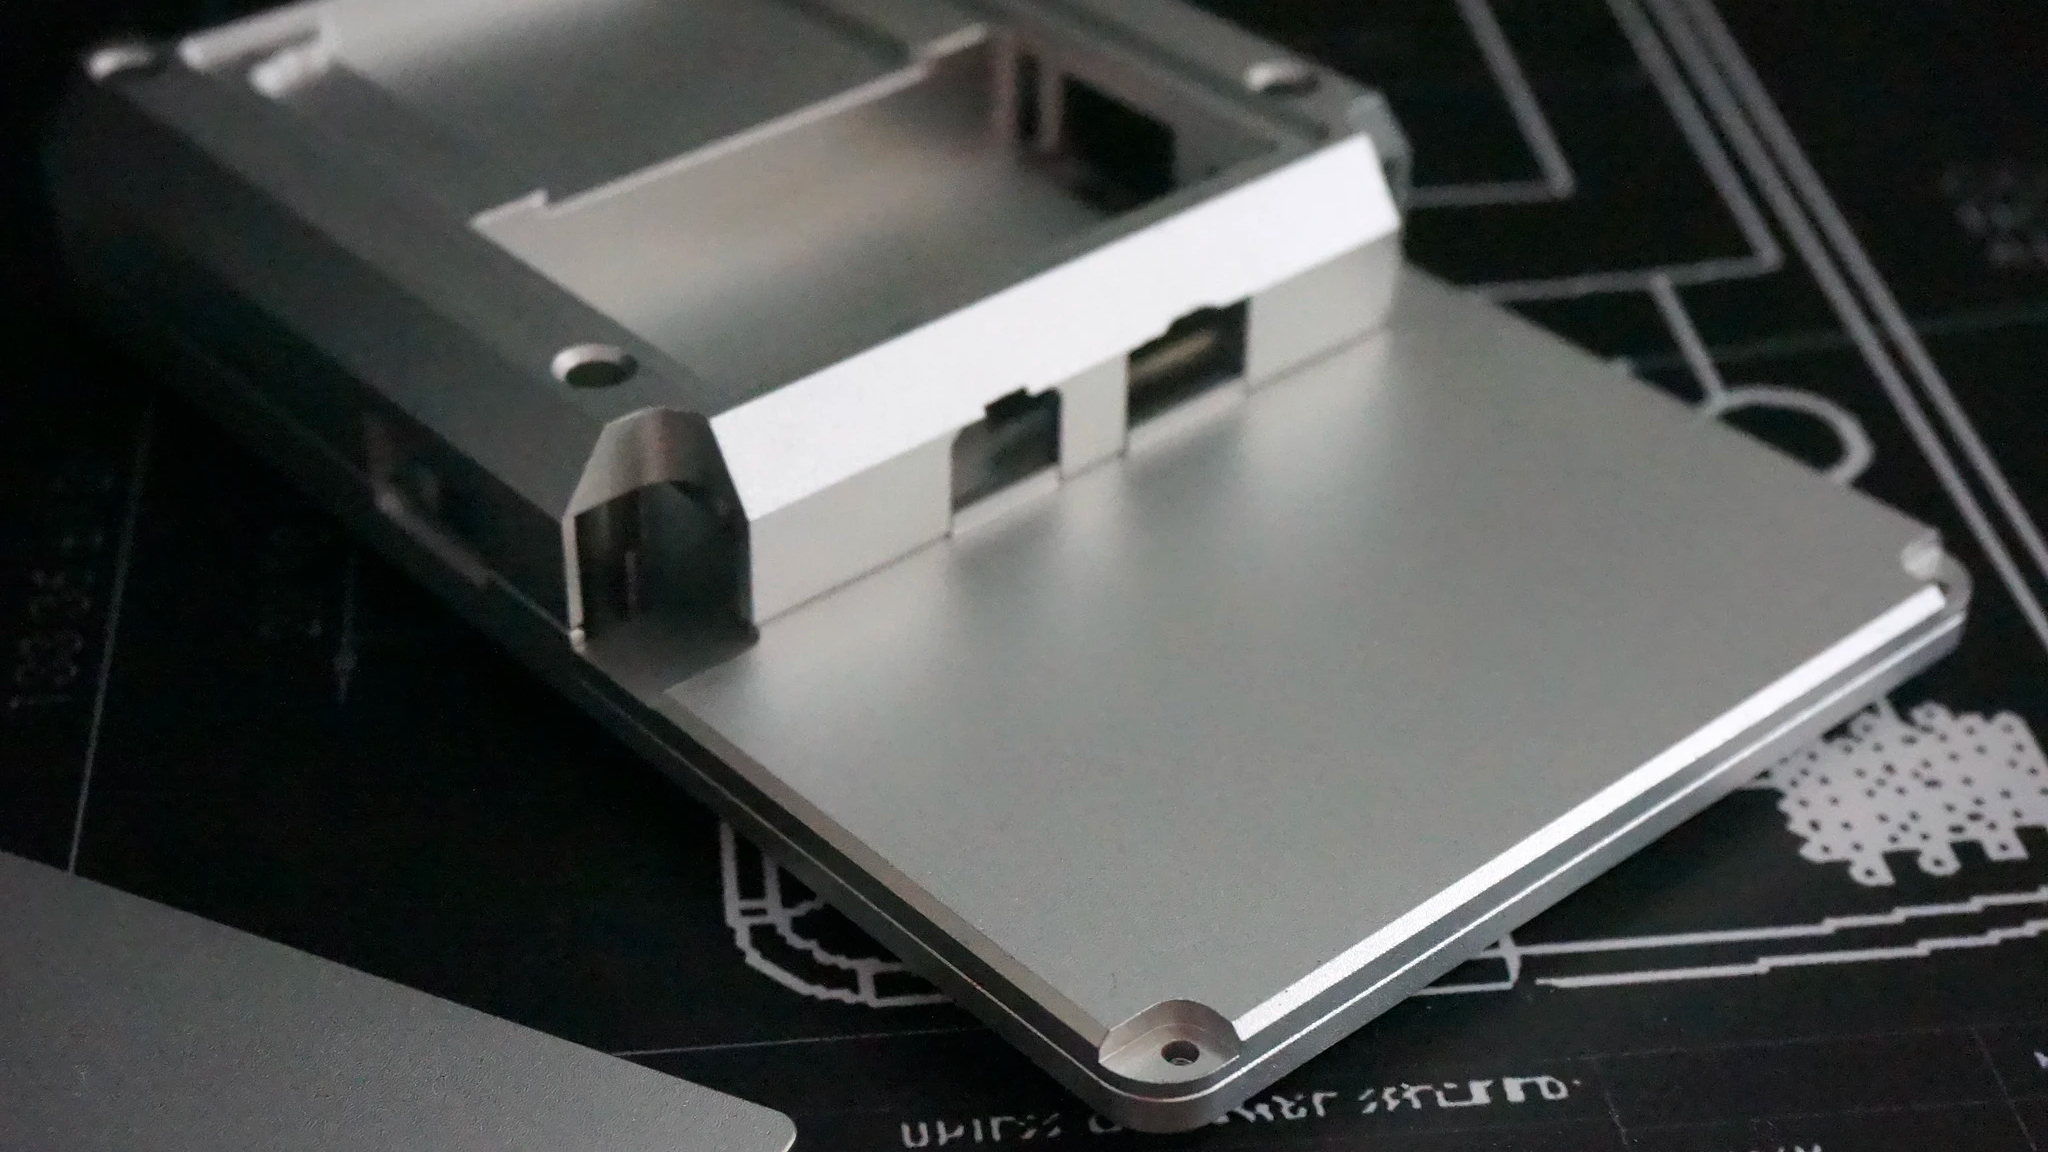 Lustworthy Aluminium Shell Turns the GBA SP Into a MacBook-Inspired Original Game Boy